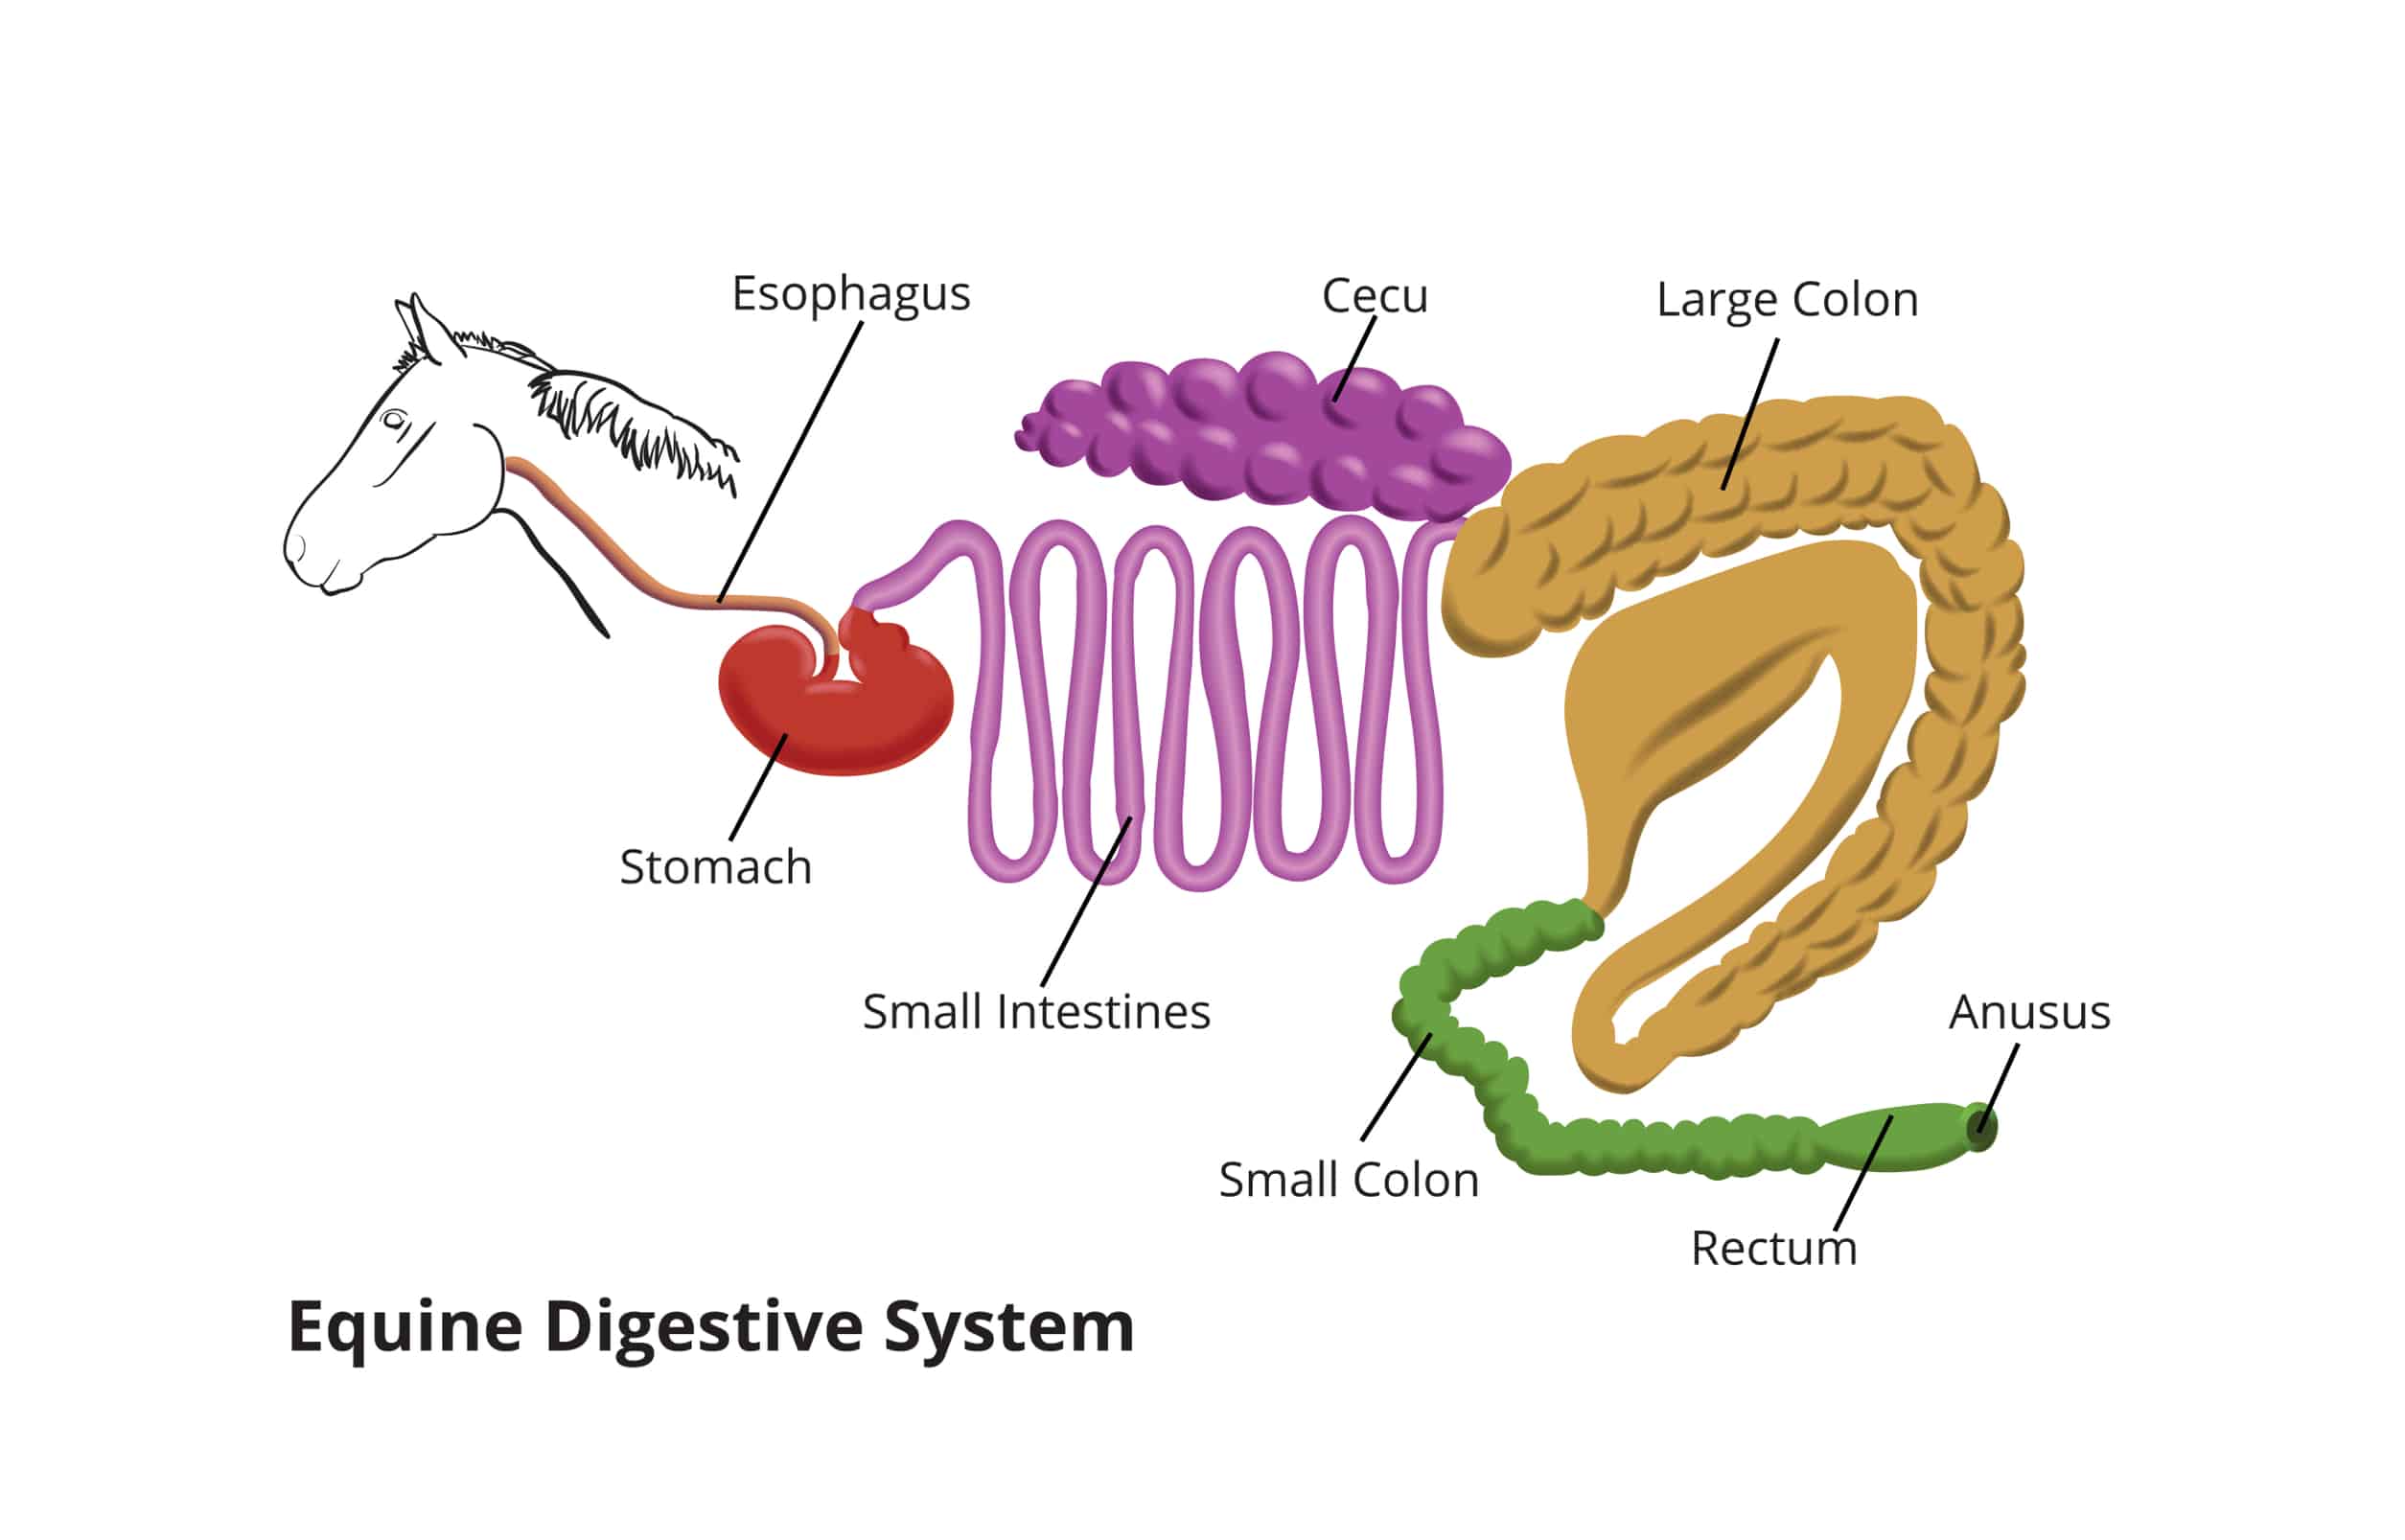 The equine digestive system